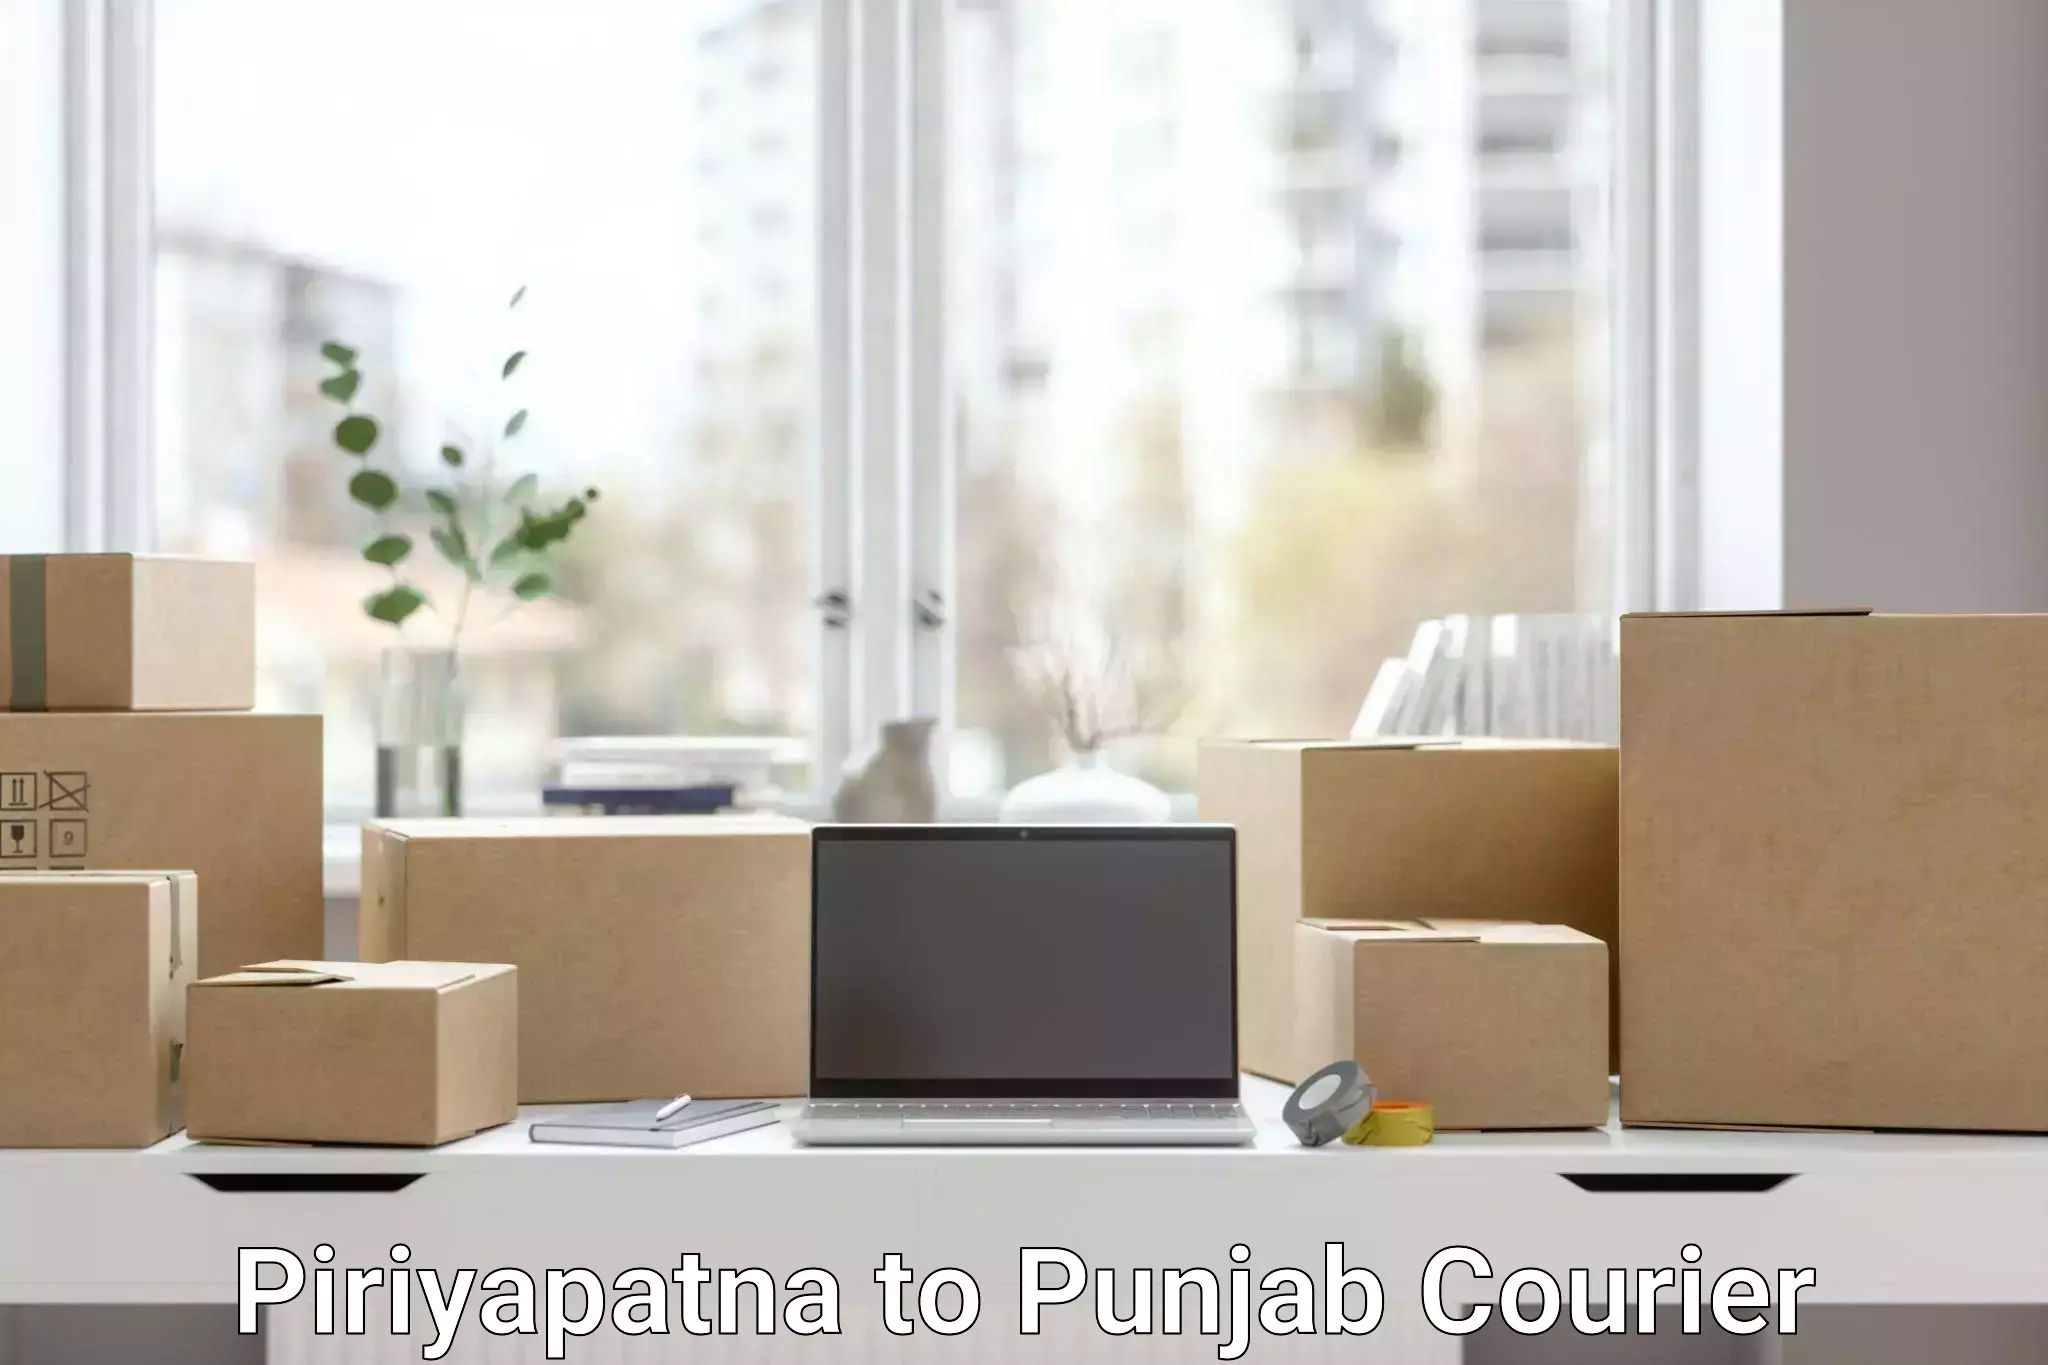 High value parcel delivery in Piriyapatna to Mohali